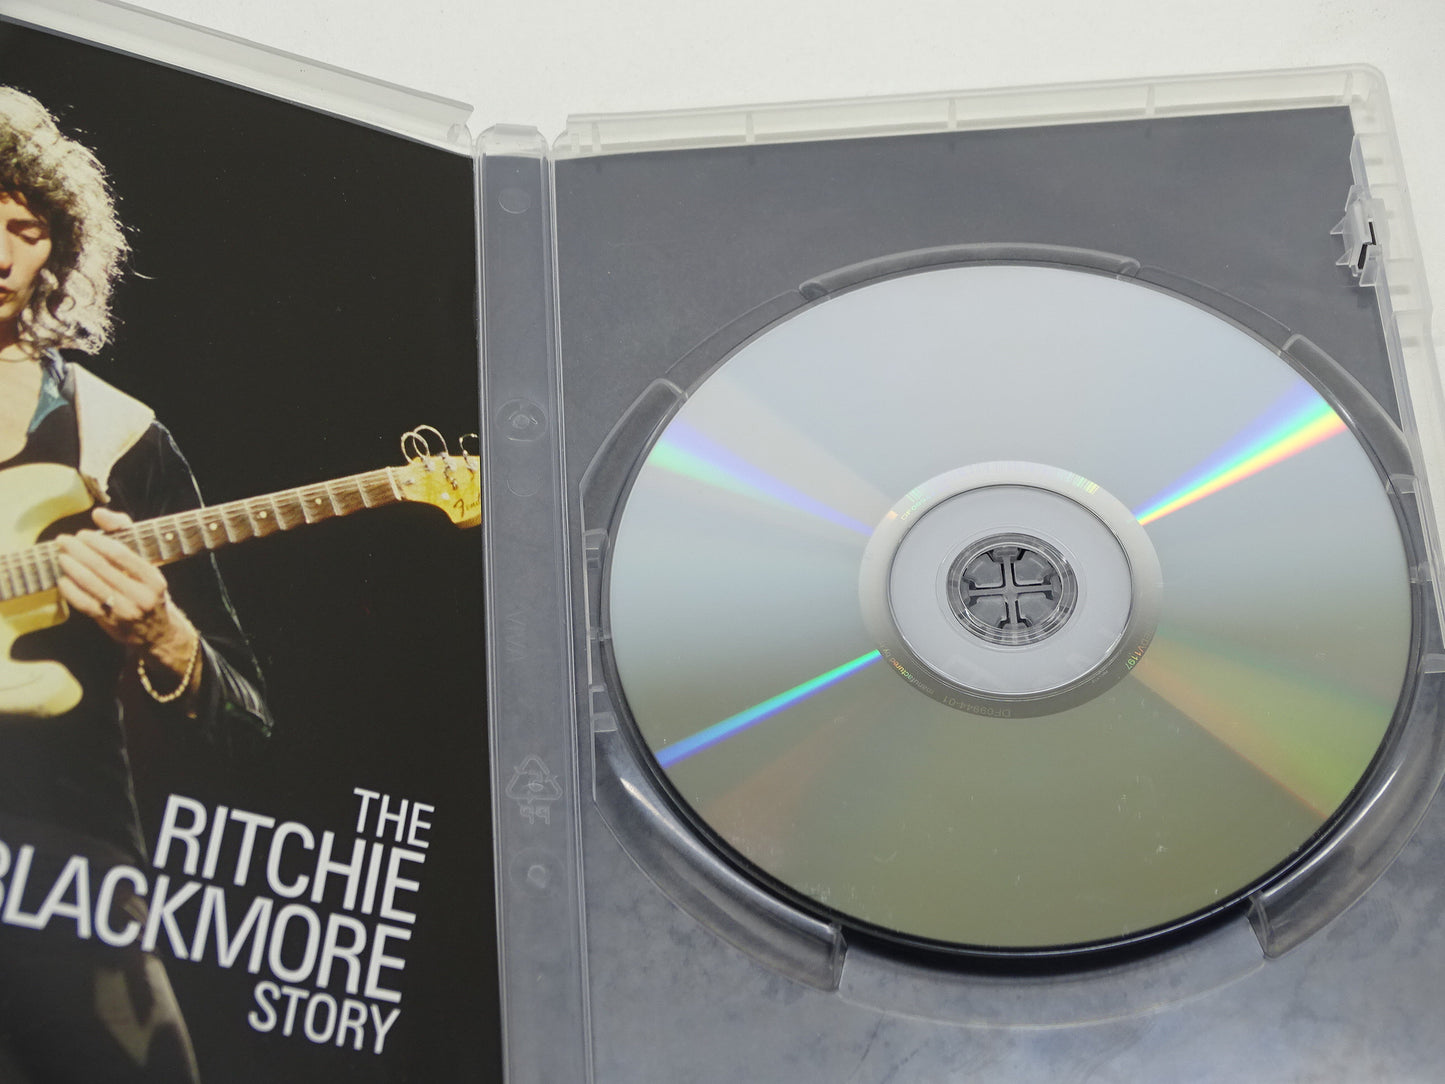 DVD: The Ritchie Blackmore Story, 2015